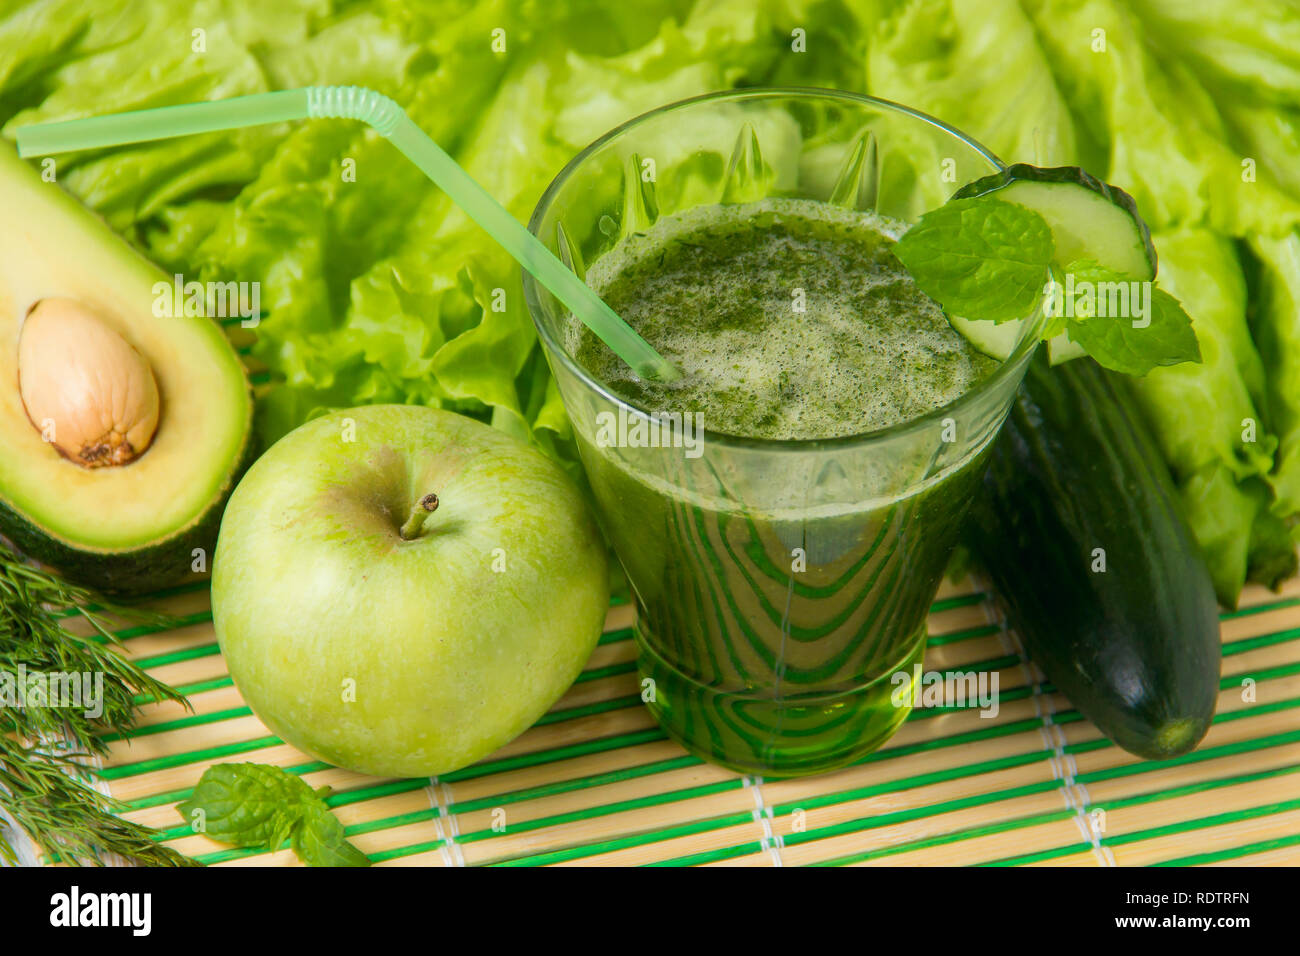 Healthy green smoothie with ingredients on wooden background. Stock Photo